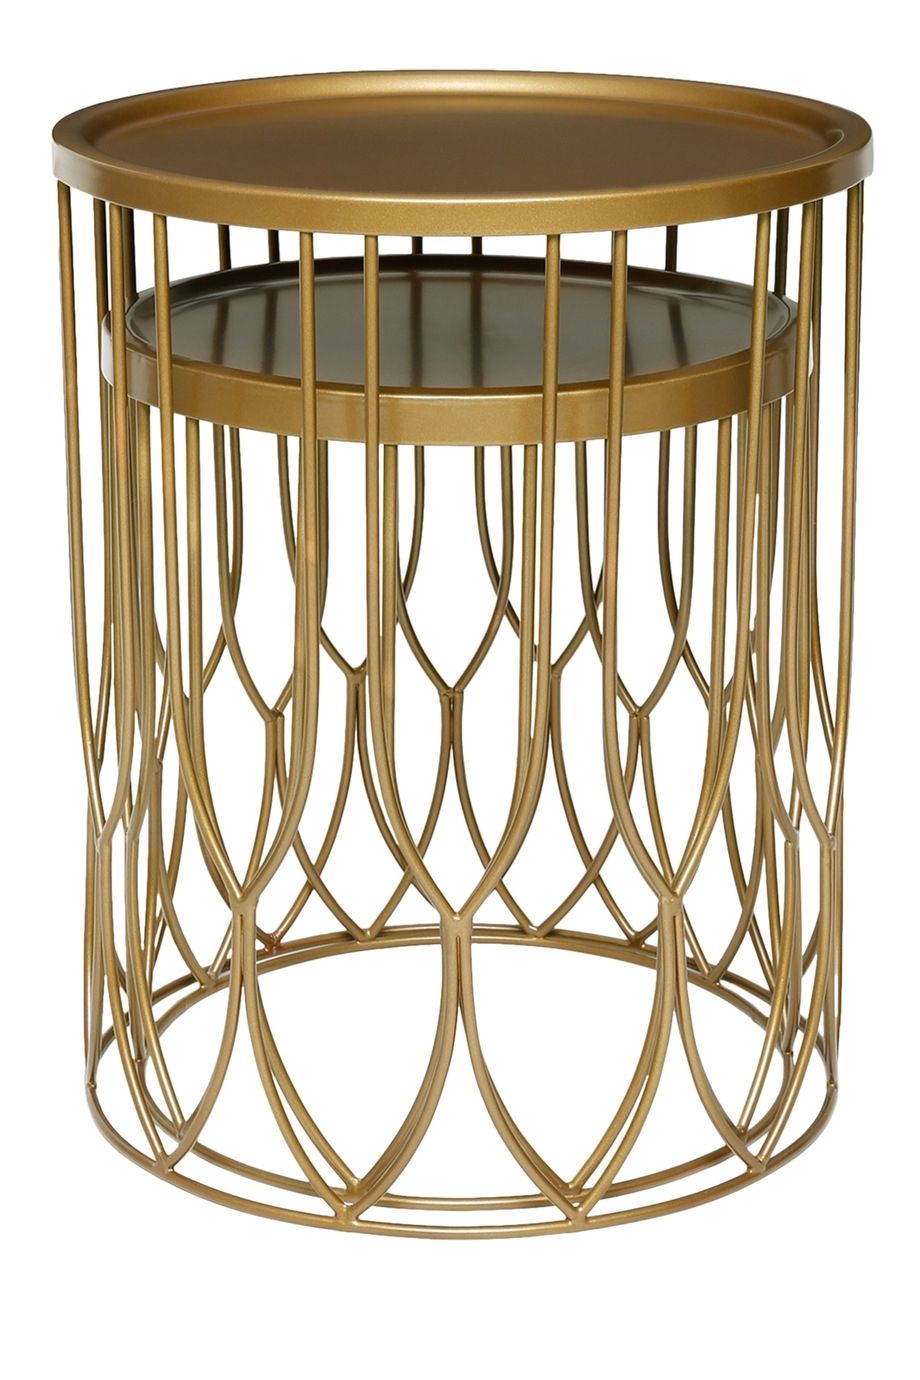 Heritage | Casablanca Set Of 2 Side Tables In Gold Finish | Myer Online Pertaining To Casablanca Coffee Tables (View 27 of 30)